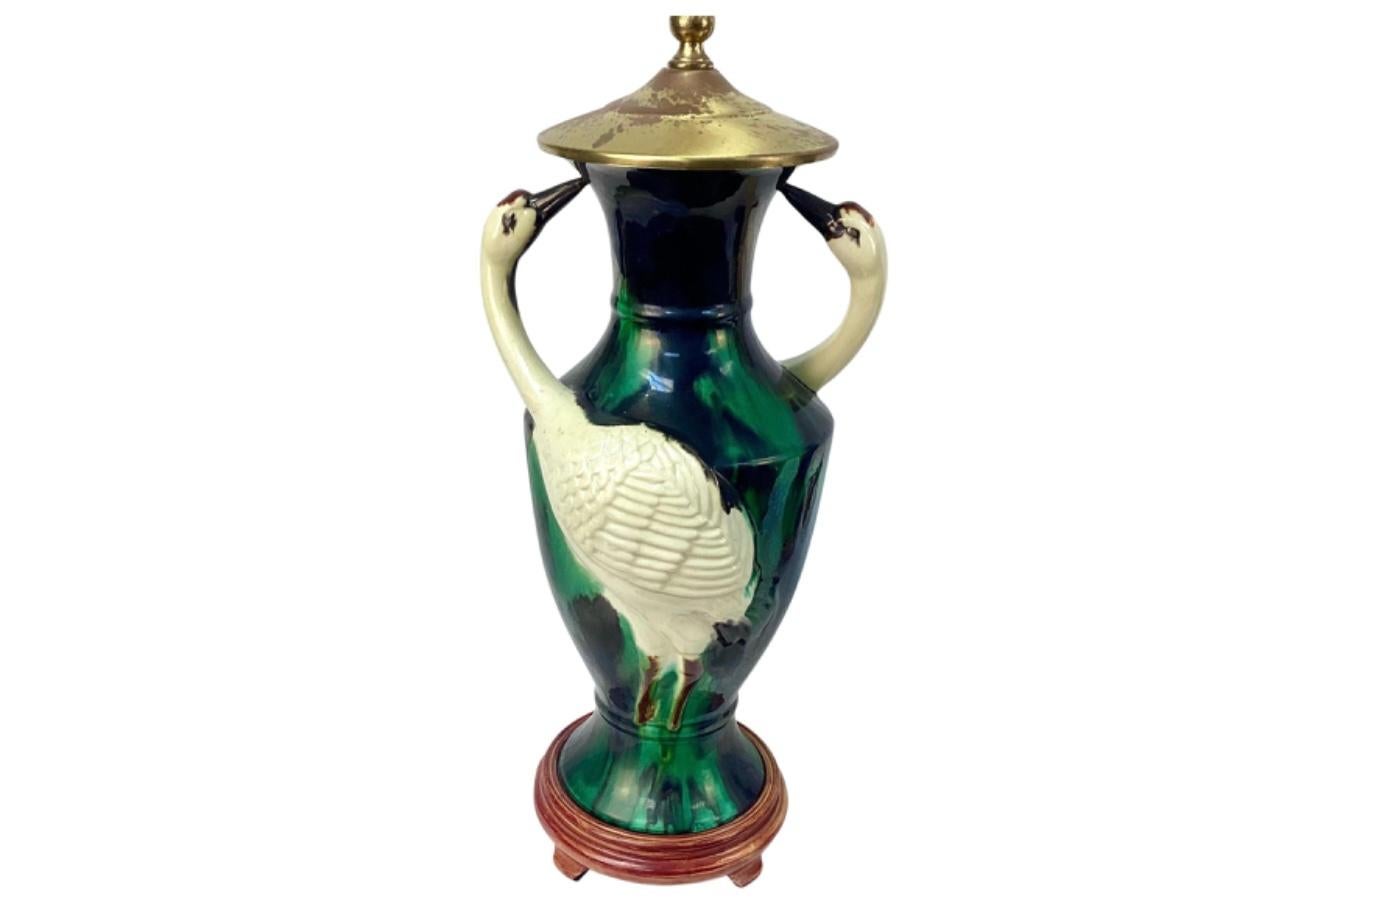 French Pair Of Mid-Century Majolica Vases With White Herons Fashioned Into Lamps